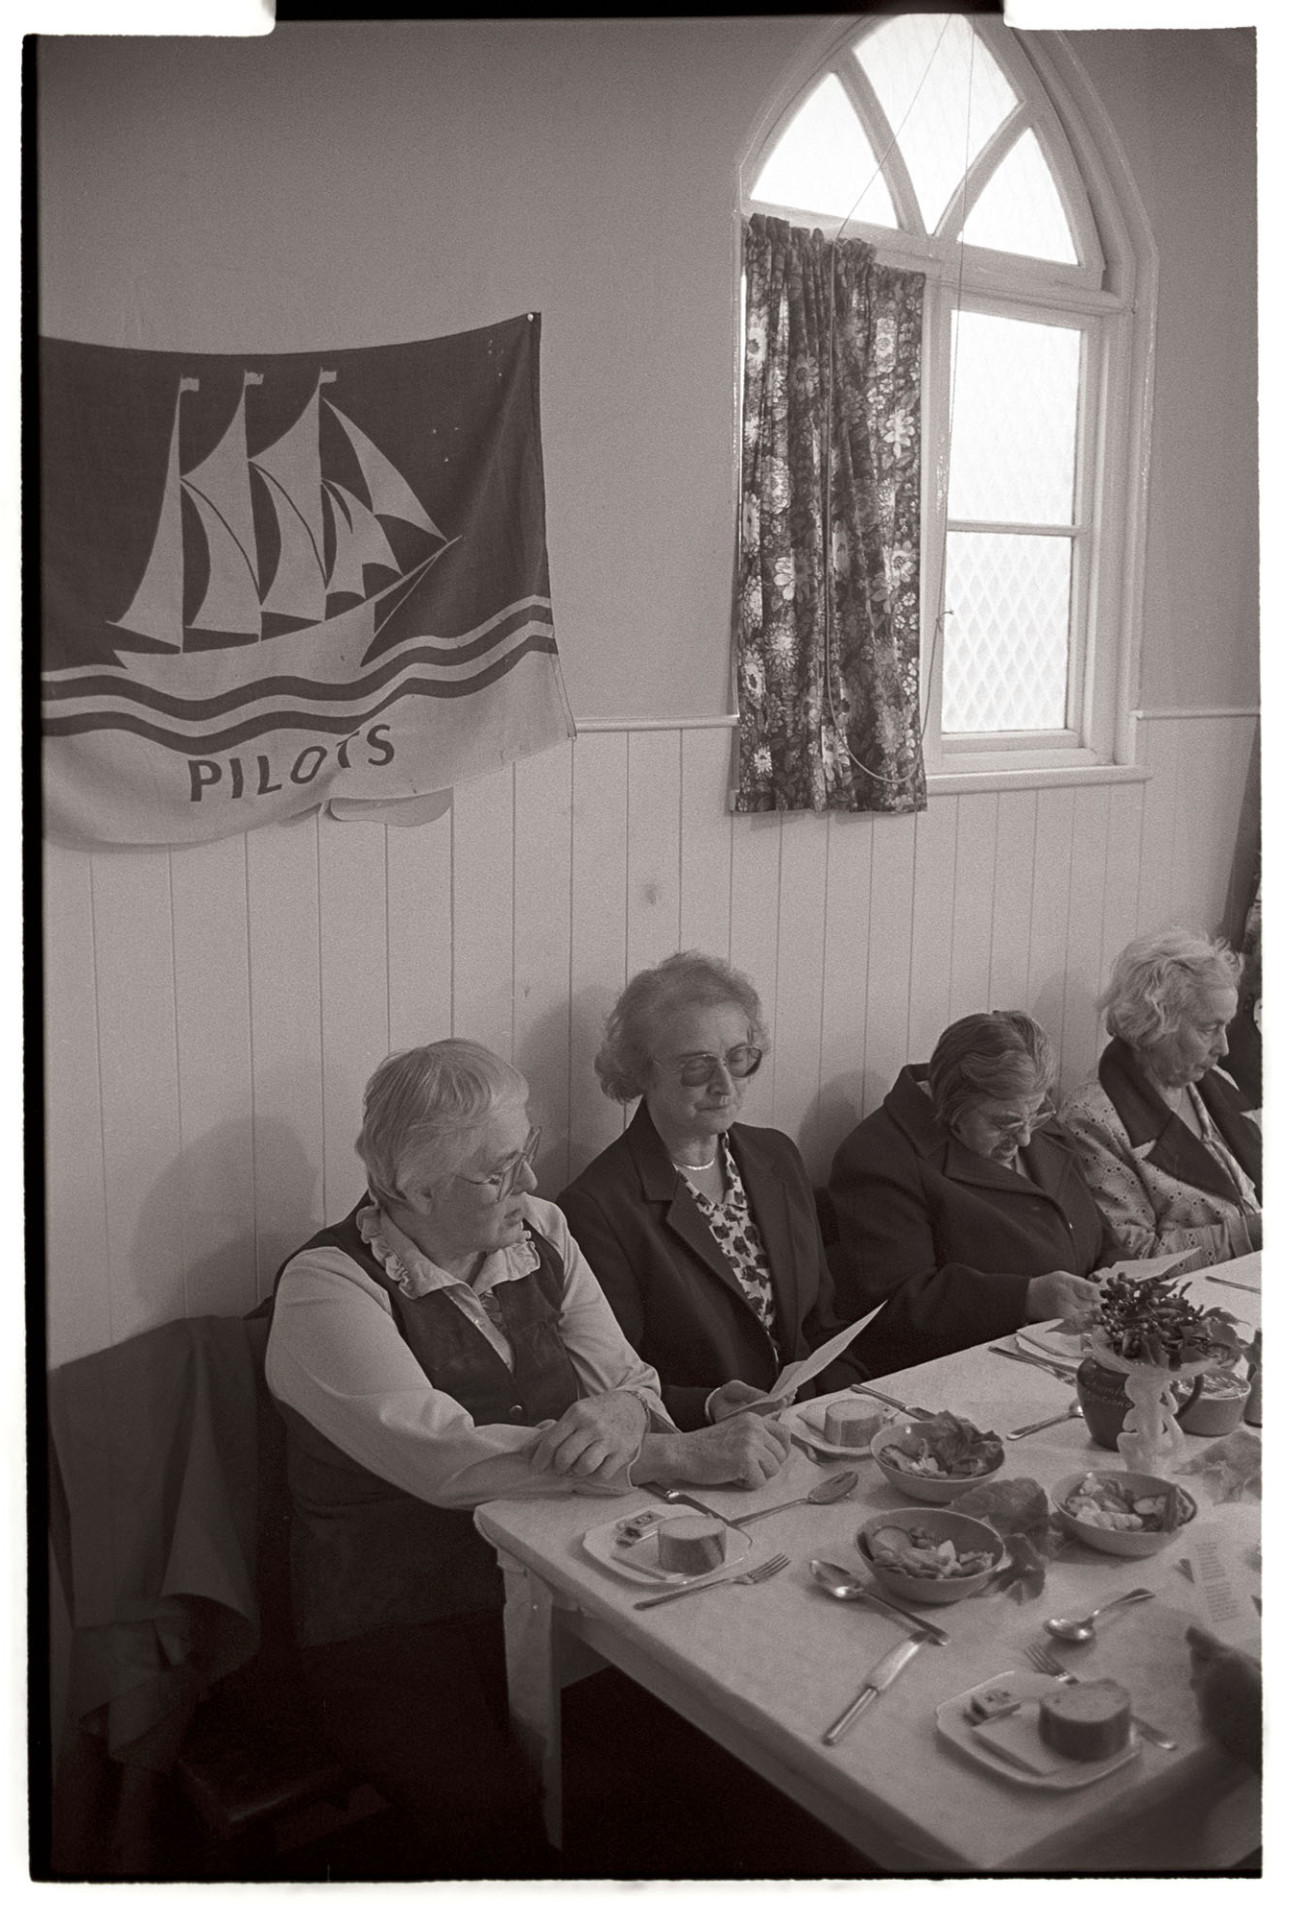 Congregational chapel Harvest supper, singing after meal. 
[Elaine Marsh, Minister and other women sat a table at the harvest supper at the Chulmleigh Congregational Chapel. They are singing a song before the supper.]